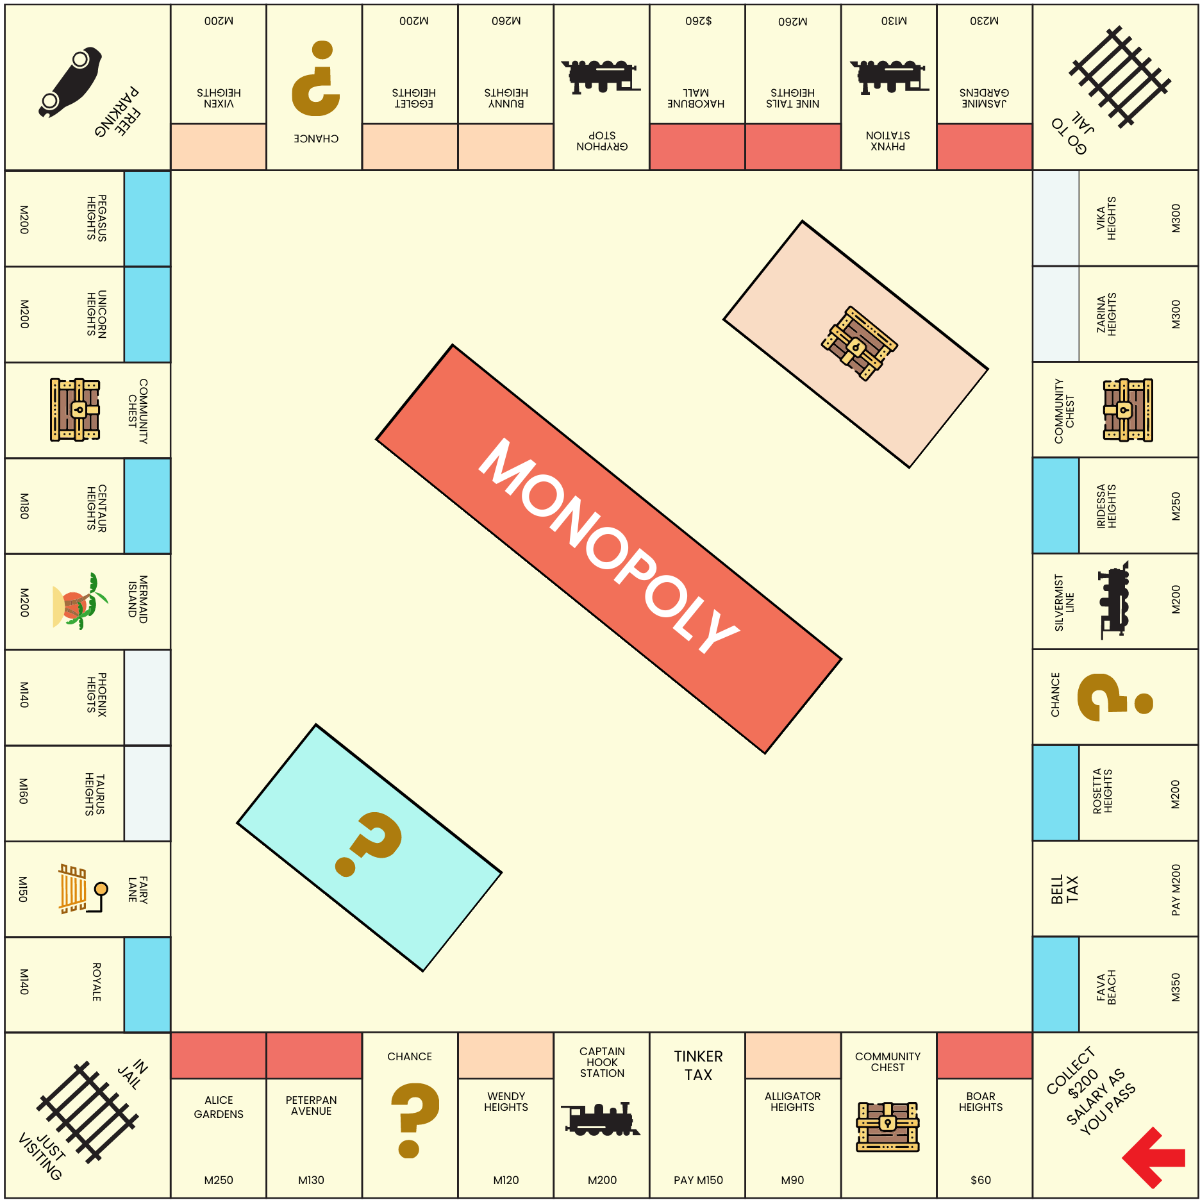 MONOPOLY, Play Free Online Board Games